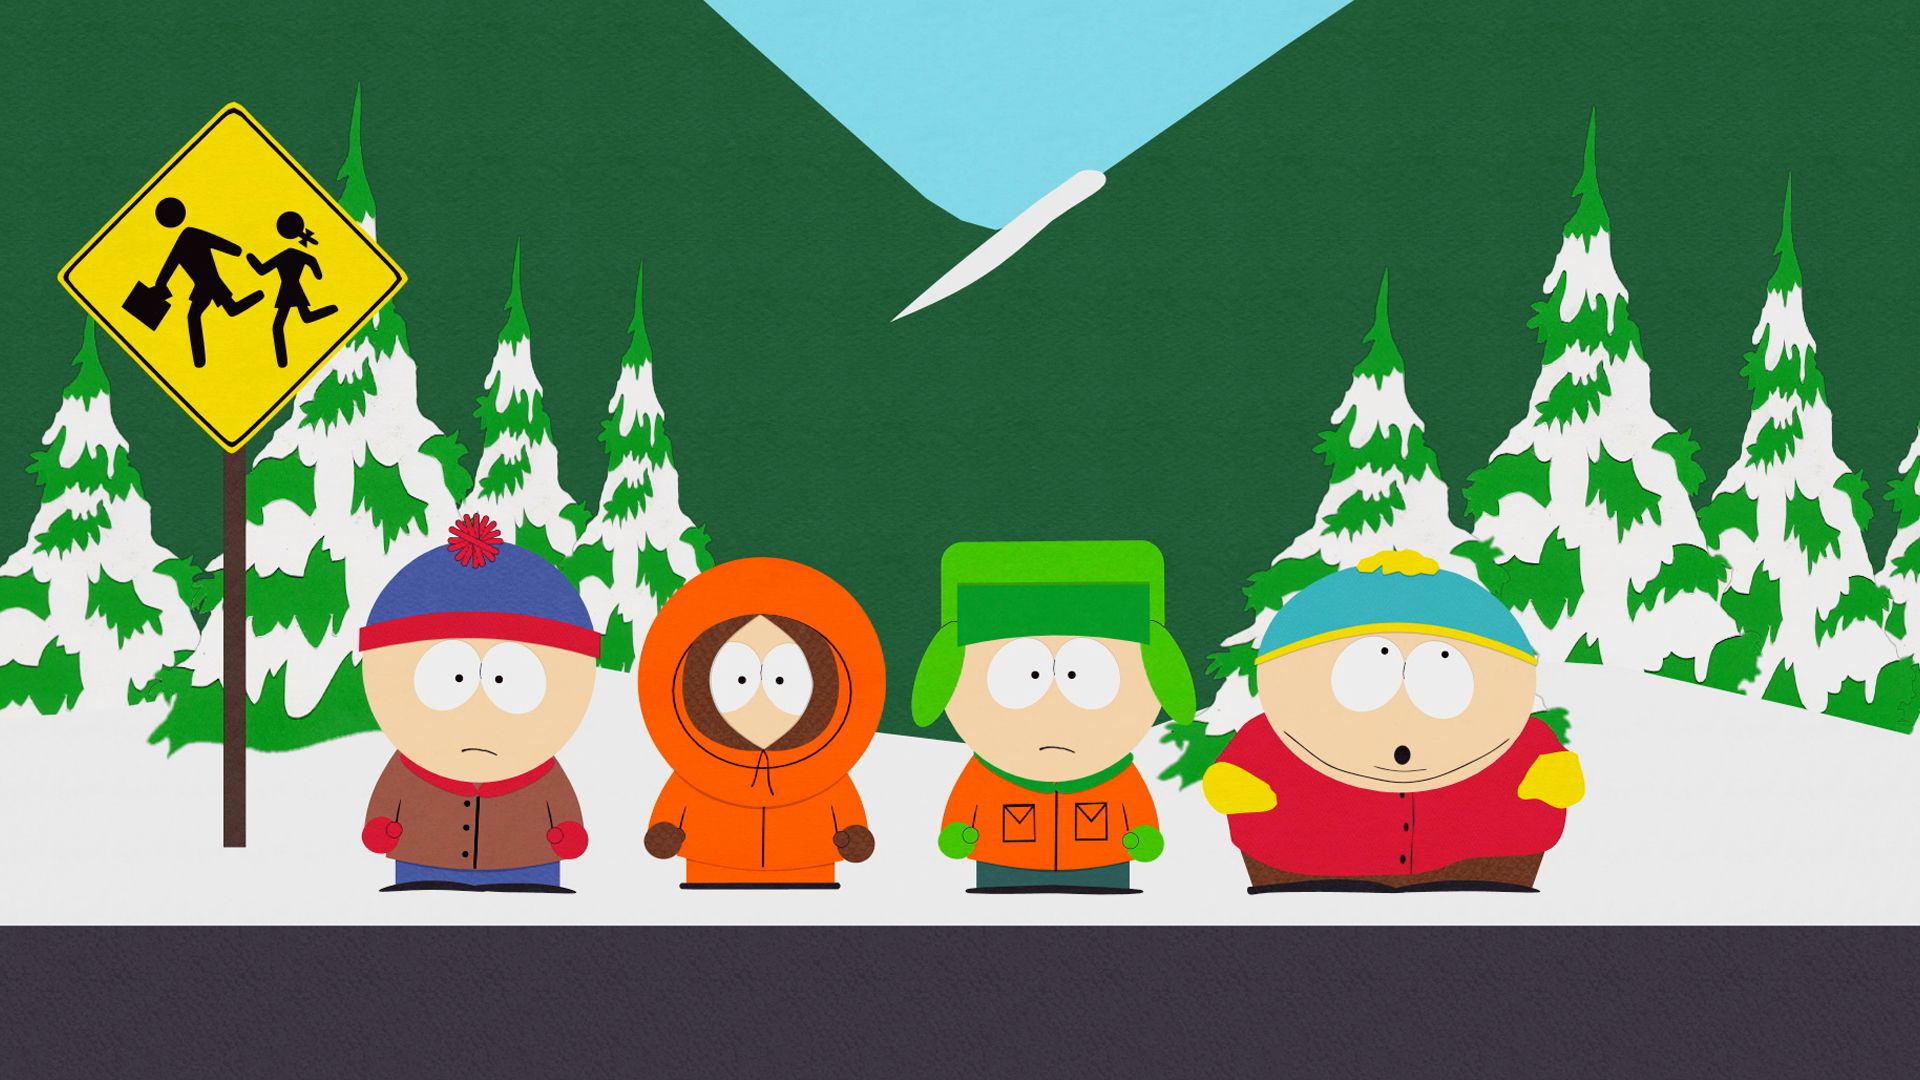 Insensitive to Butt Pirates - Seizoen 13 Aflevering 2 - South Park